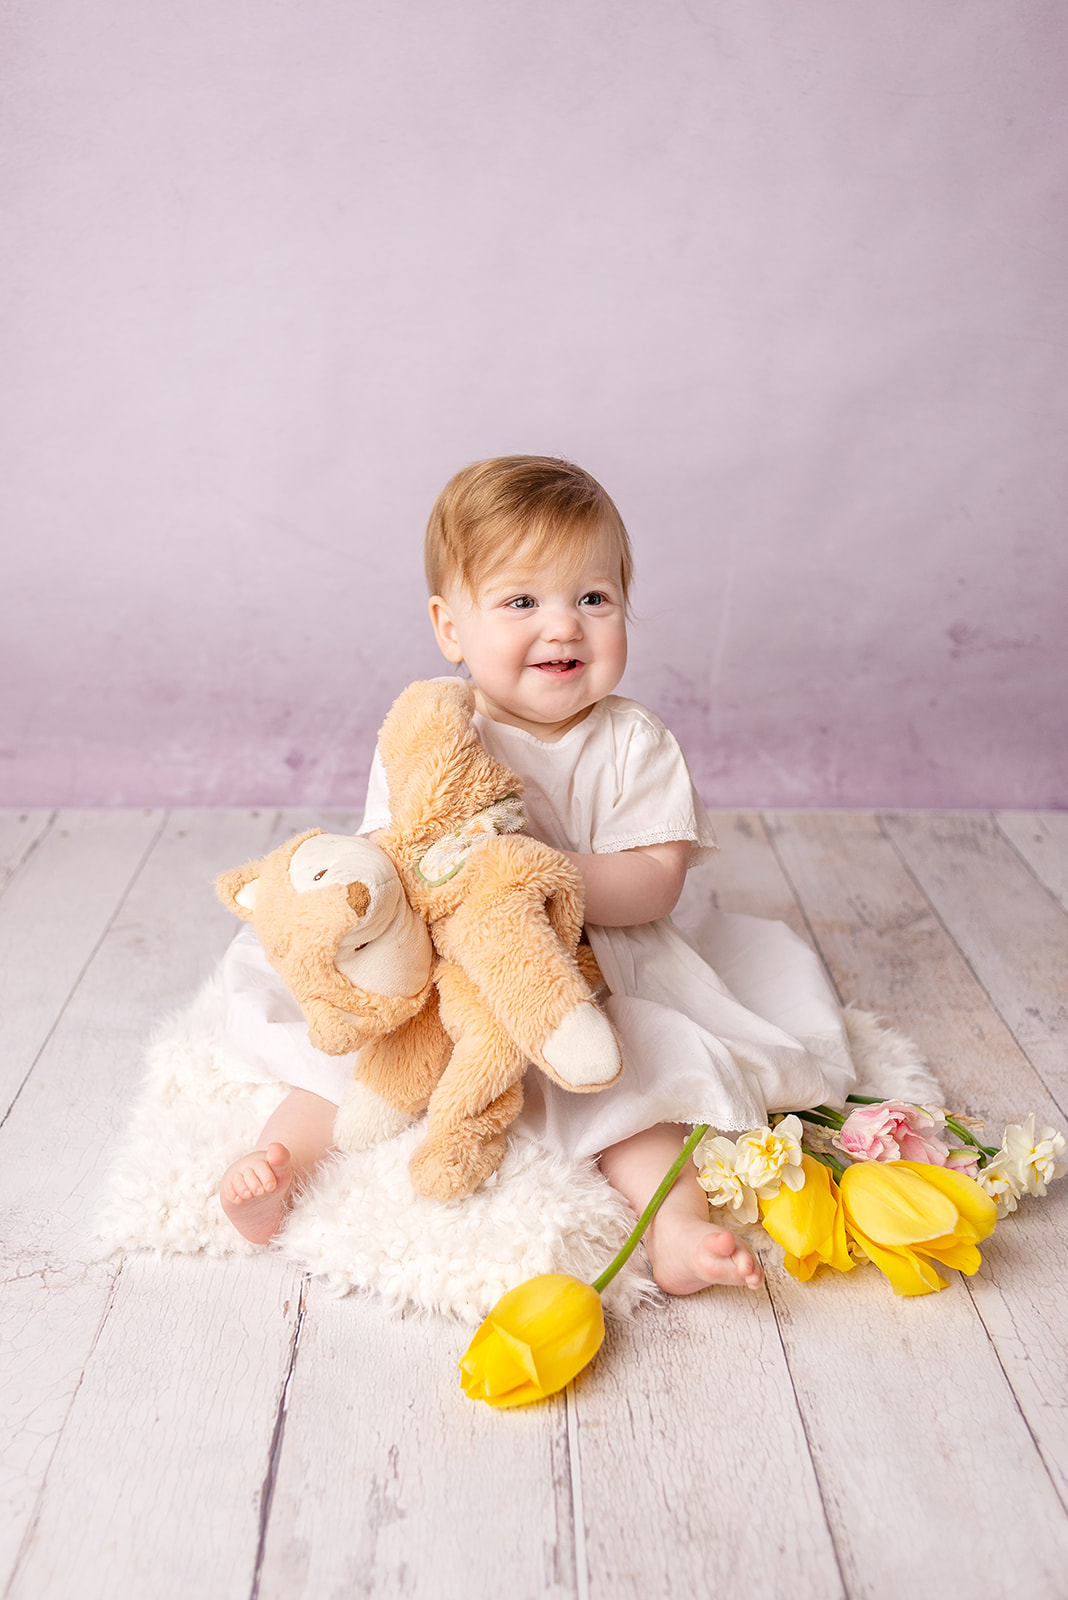 Milestone session for a first birthday of a little girl in all white dress with yellow tulips